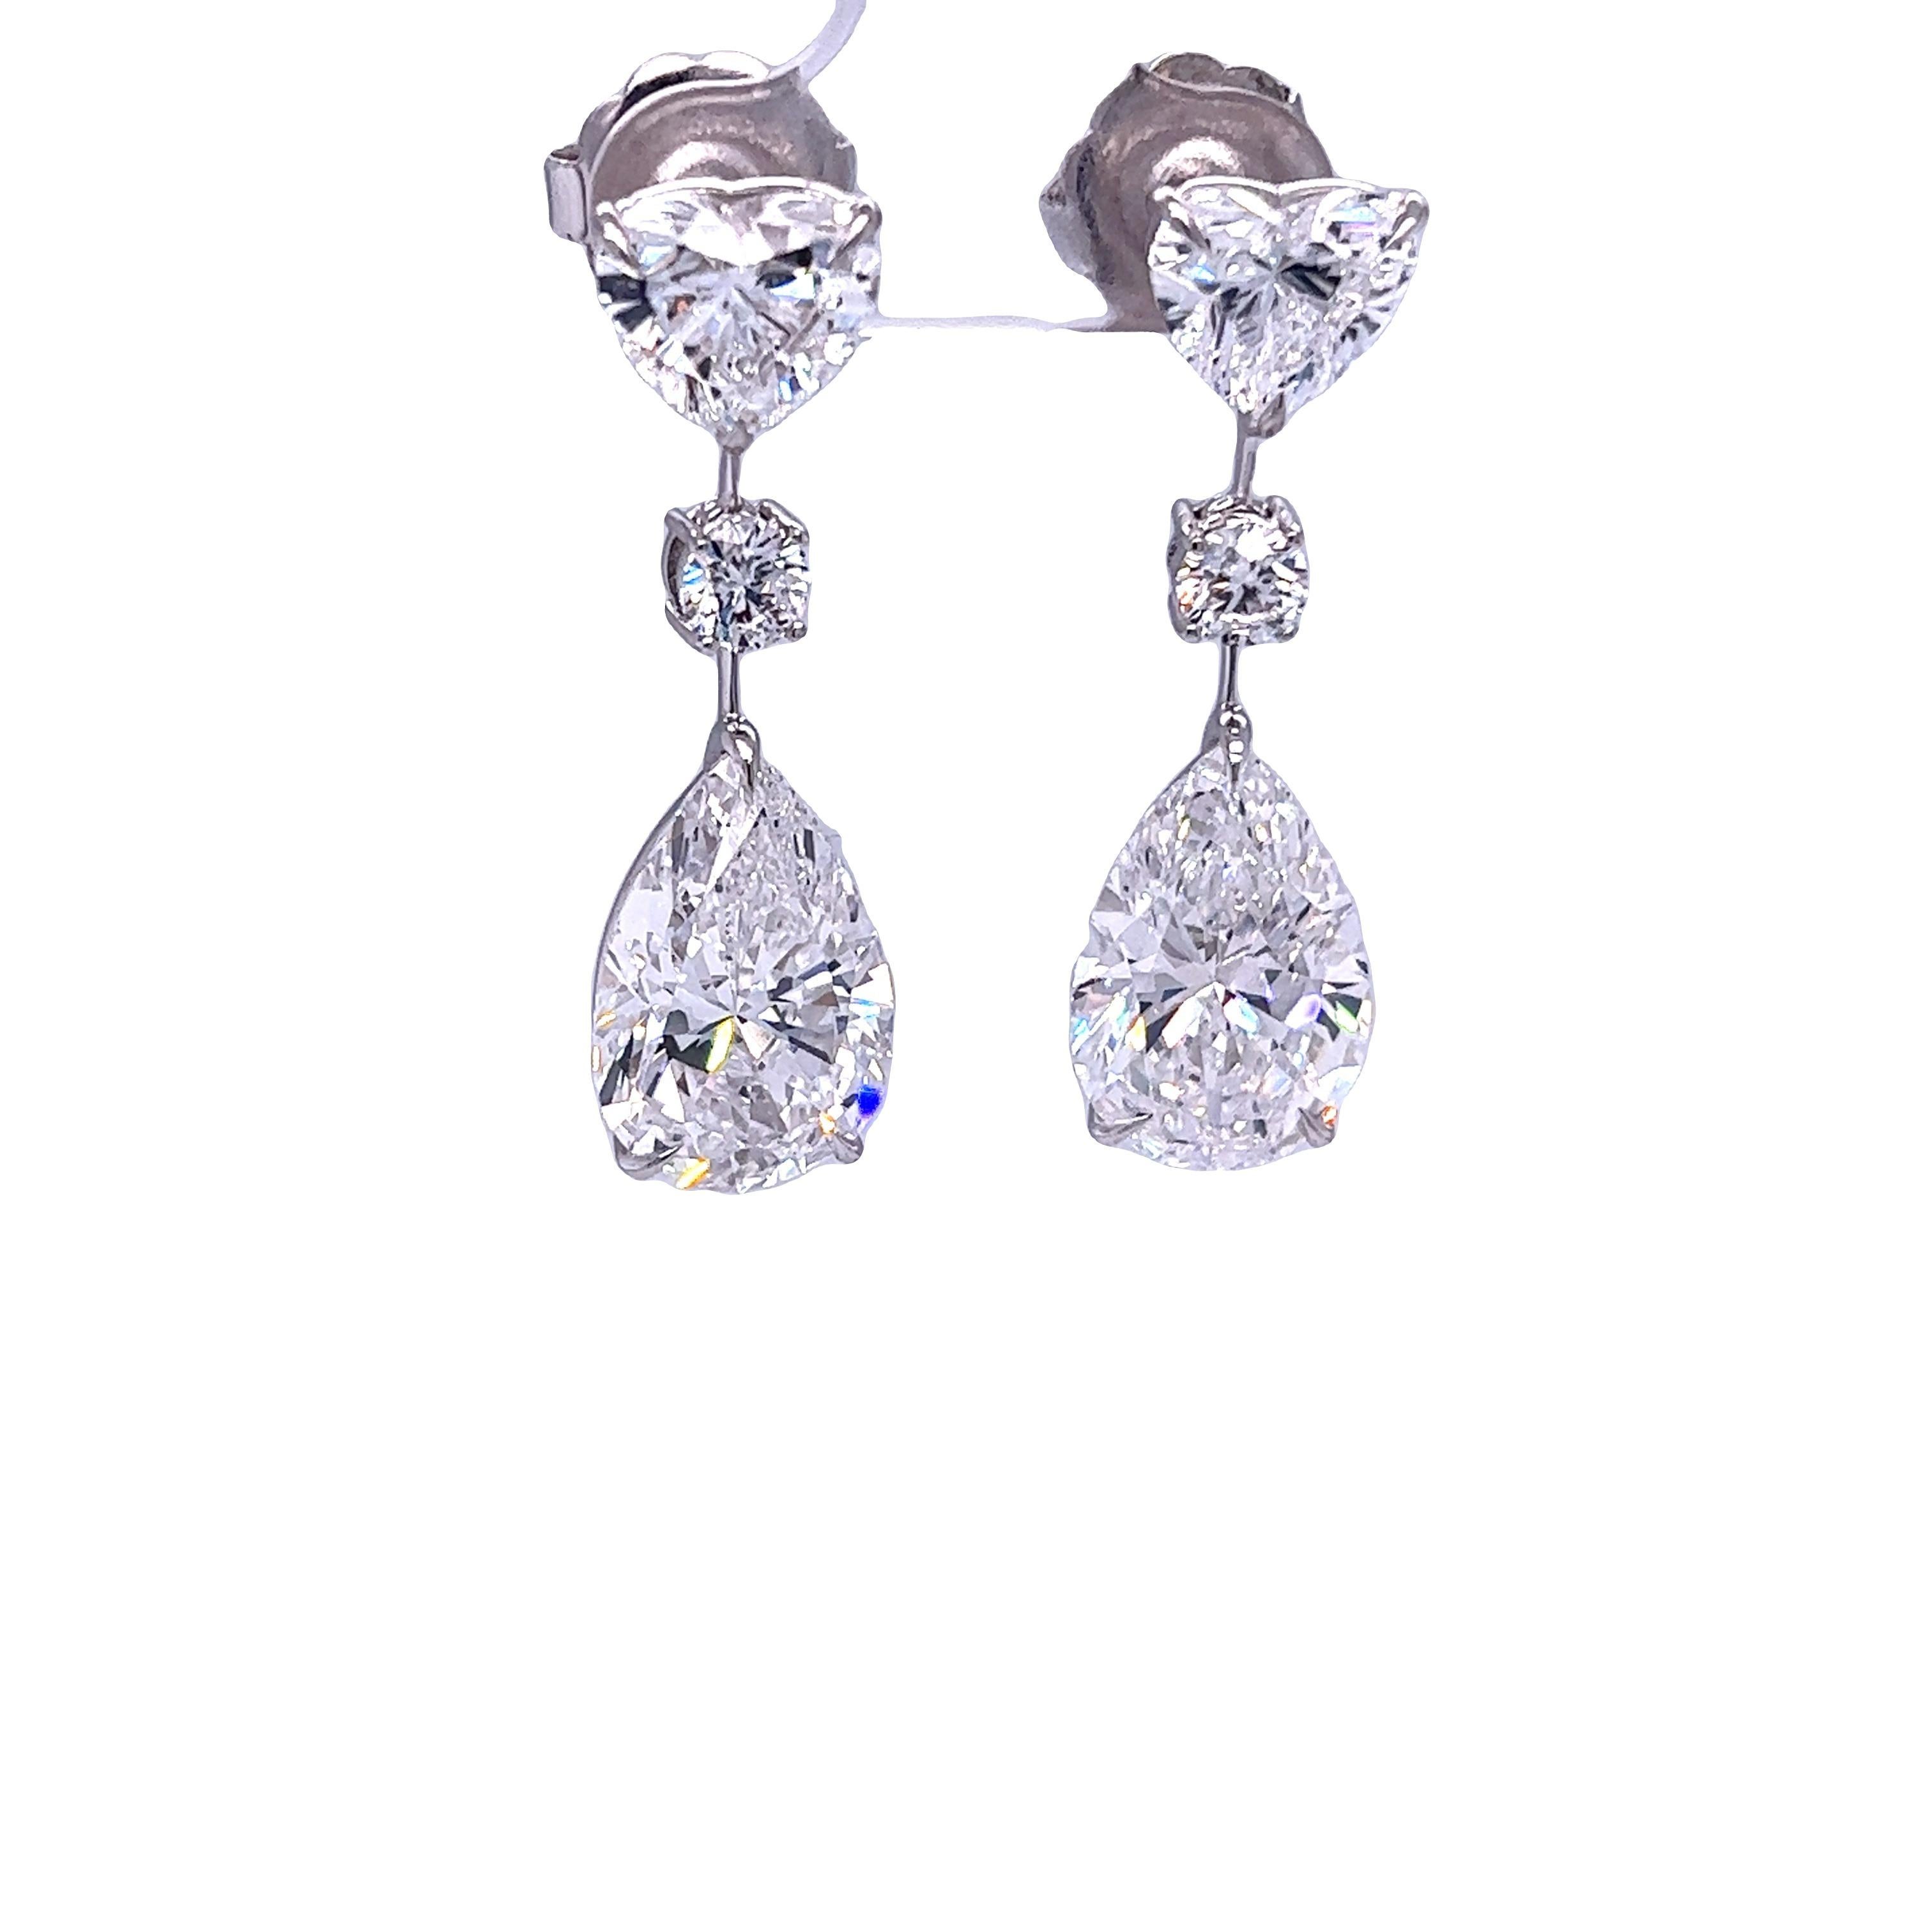 Rosenberg Diamonds & Co. 16.72 total carat weight D Internally Flawless GIA Certified is the ultimate perfection for a diamond pair of earrings. This one-of-a-kind masterpiece consist of a matched pair of 12.08 total carat weight Pear Shapes, 4.02